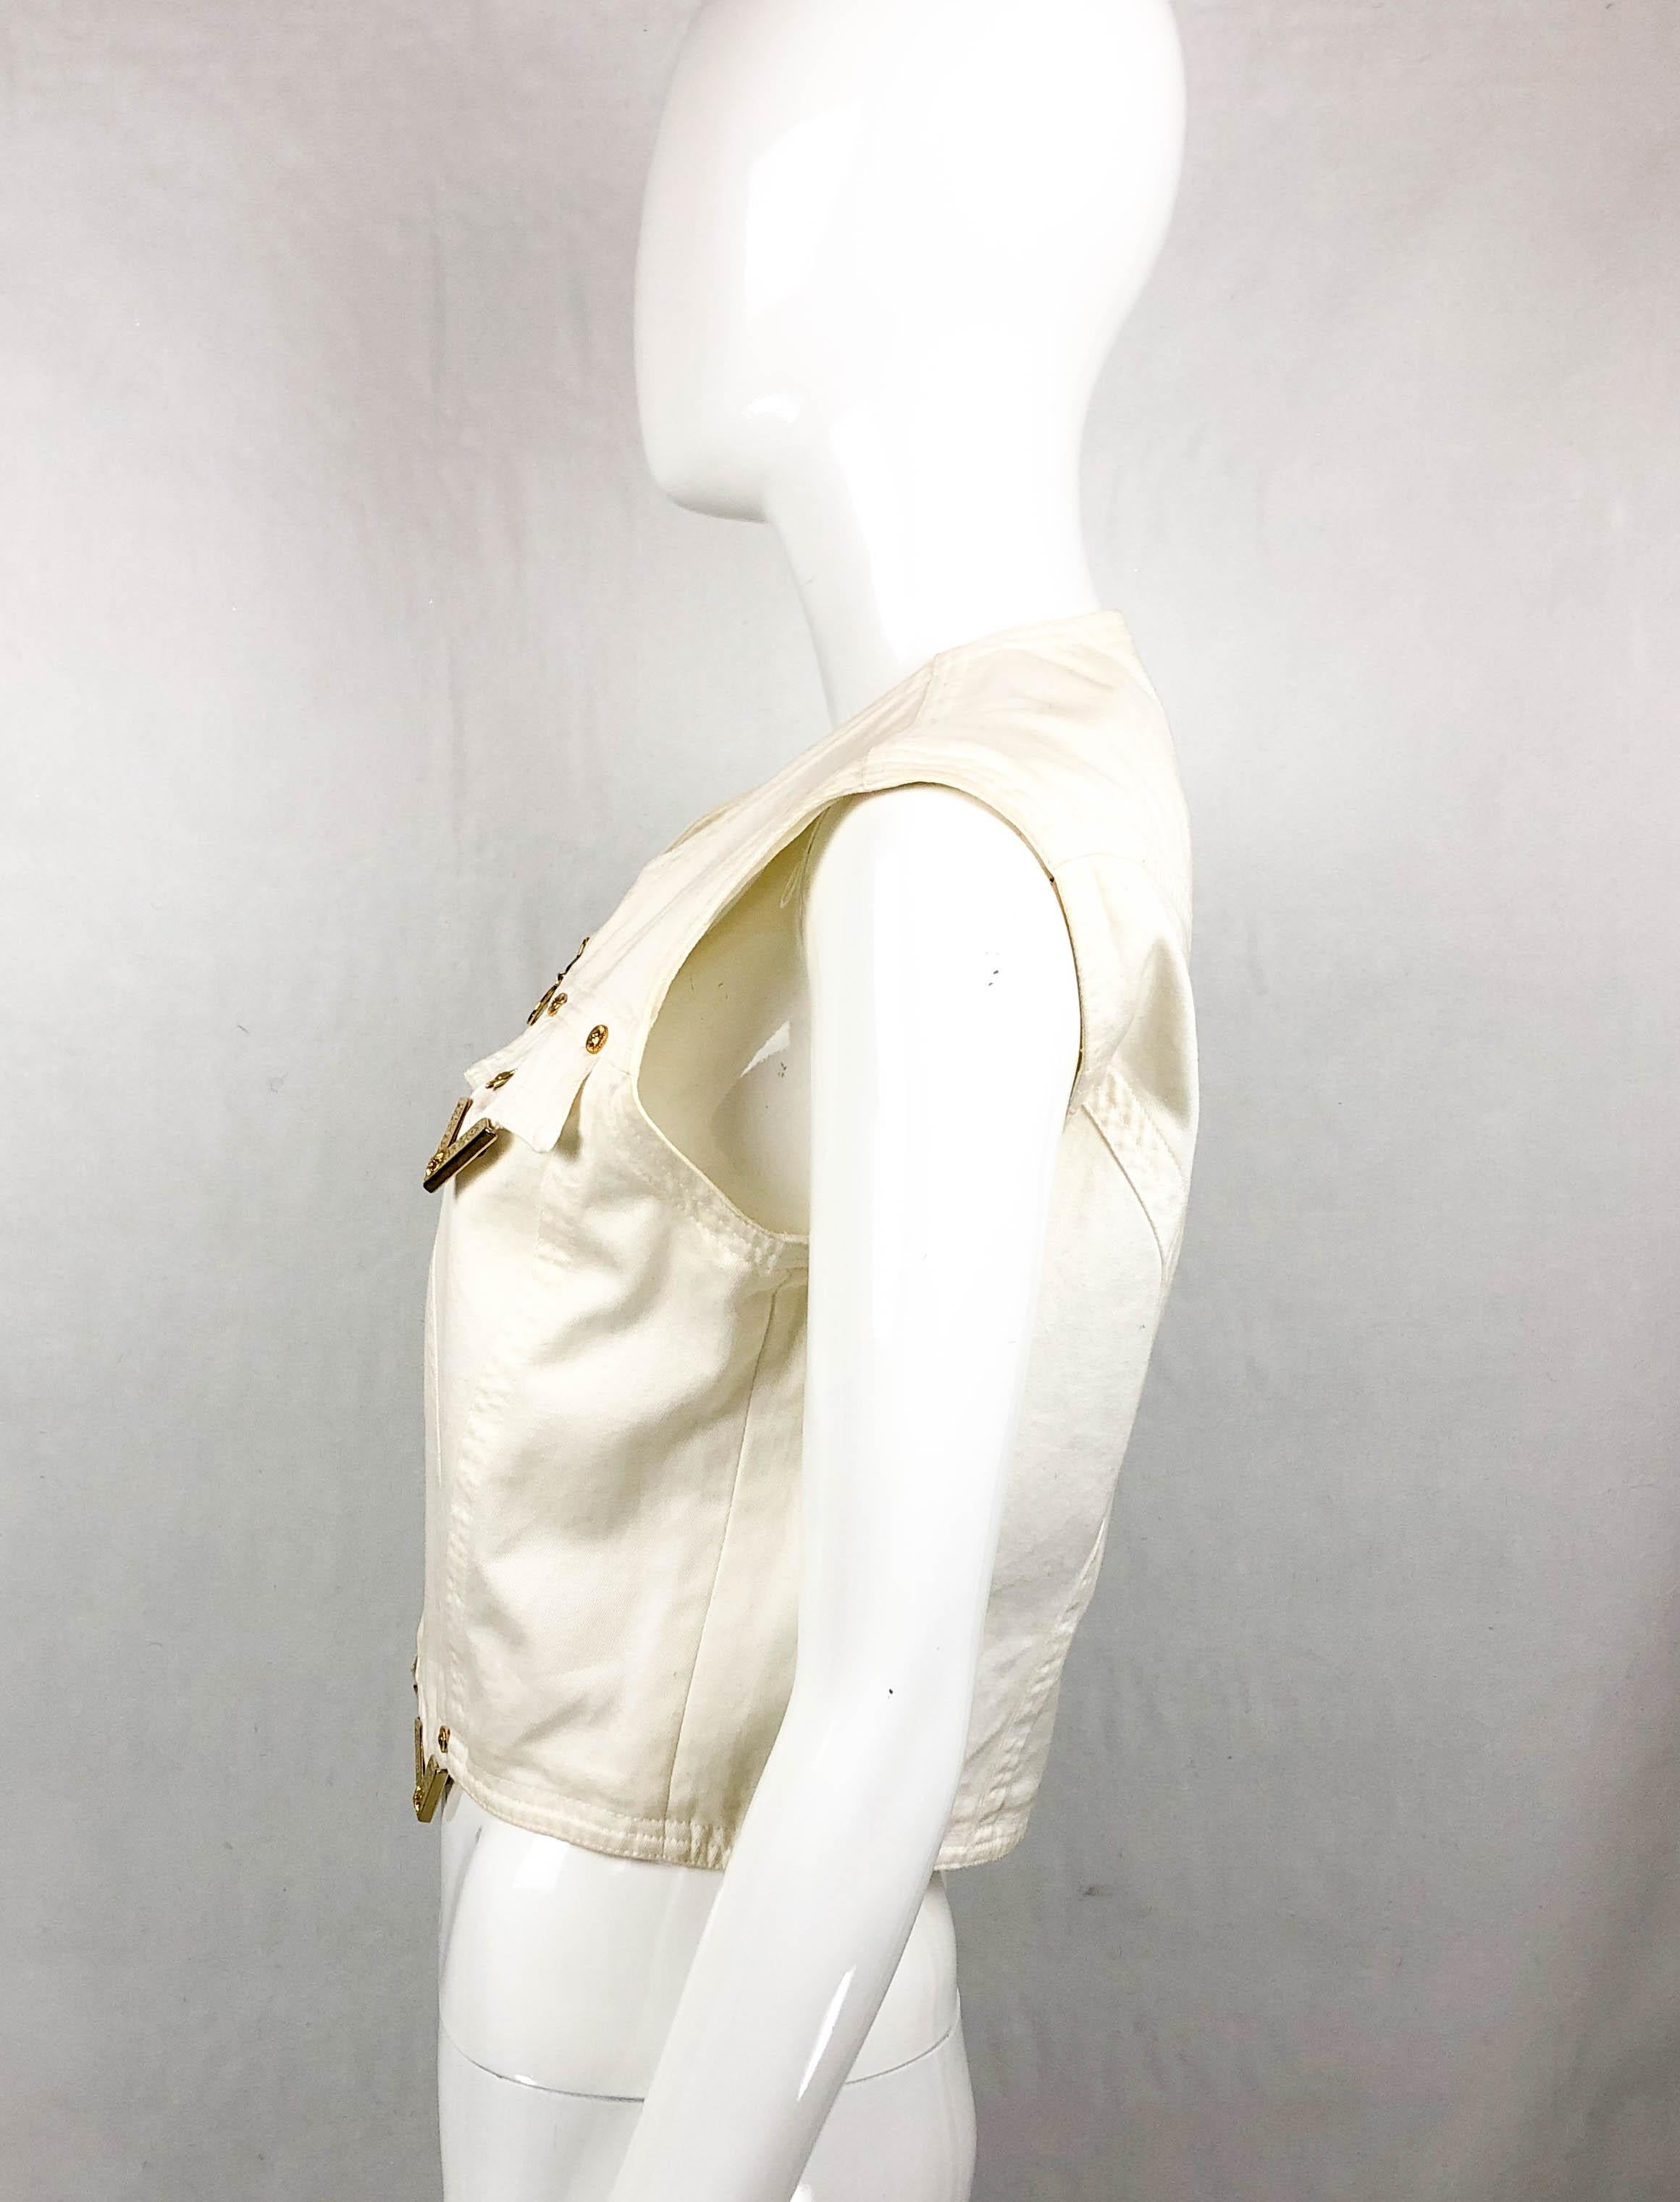 1991 Gianni Versace White Denim Waistcoat With Gilt Tips For Sale 4